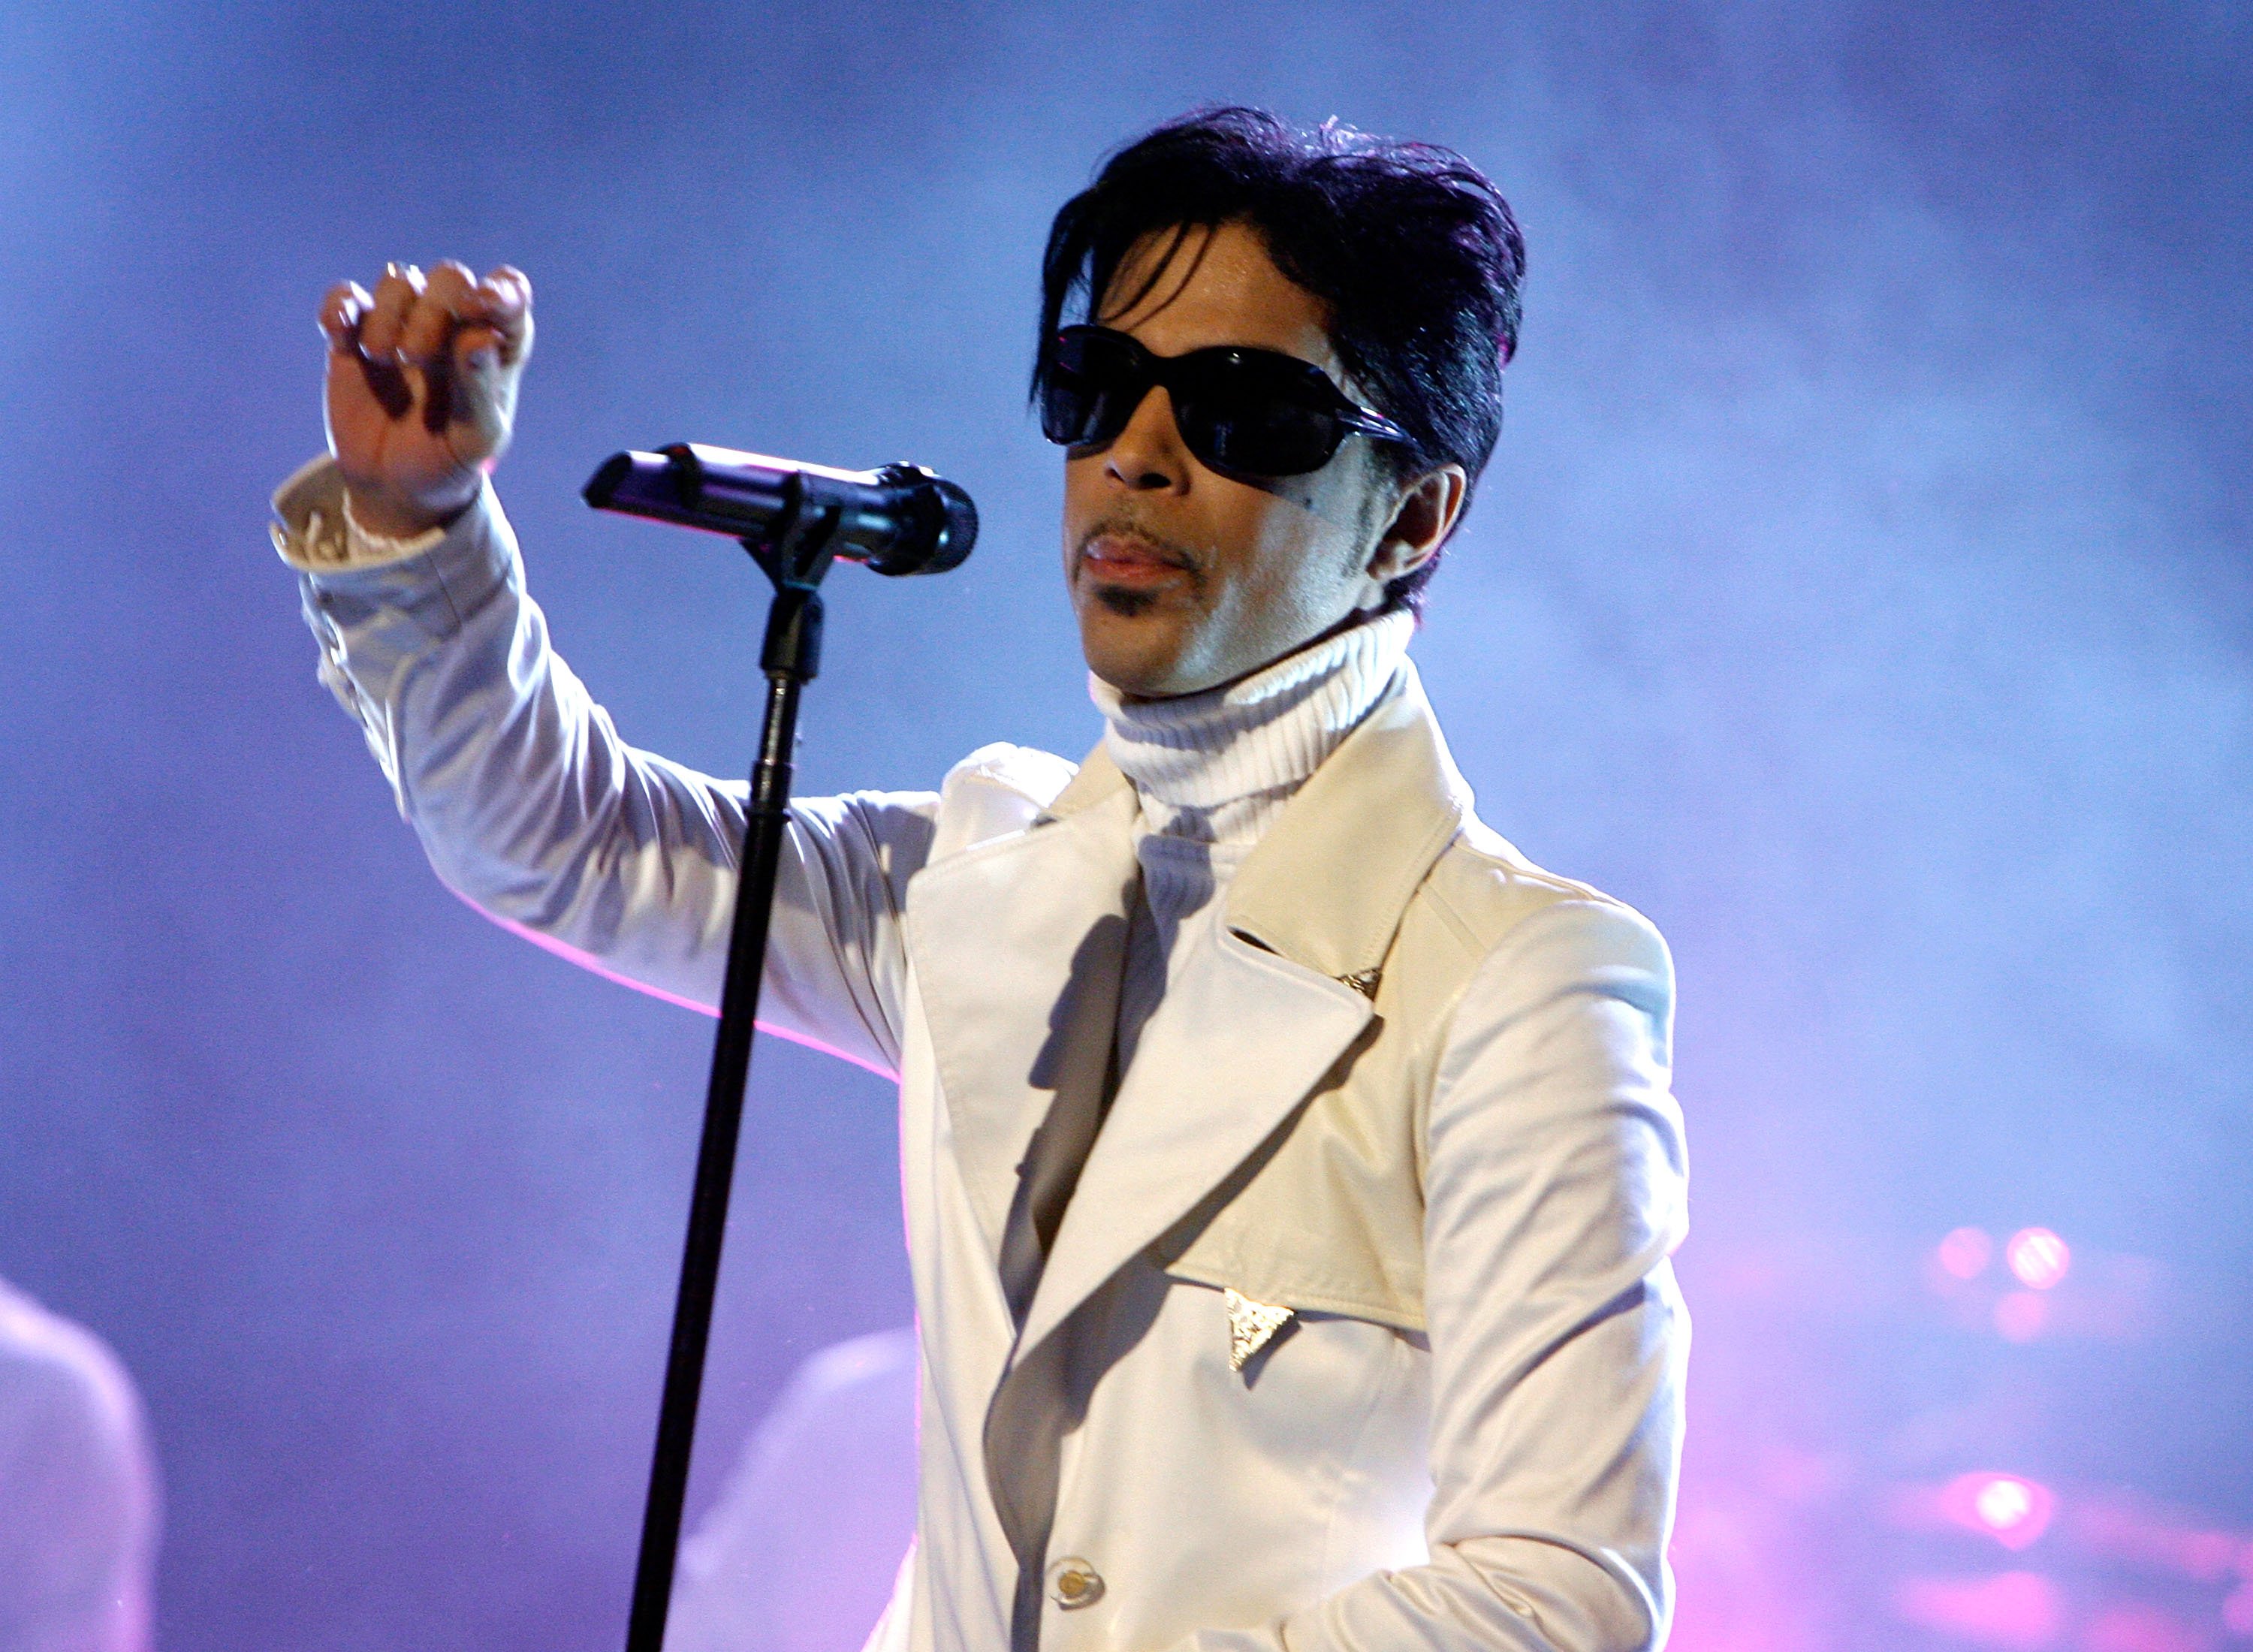 Prince with a microphone